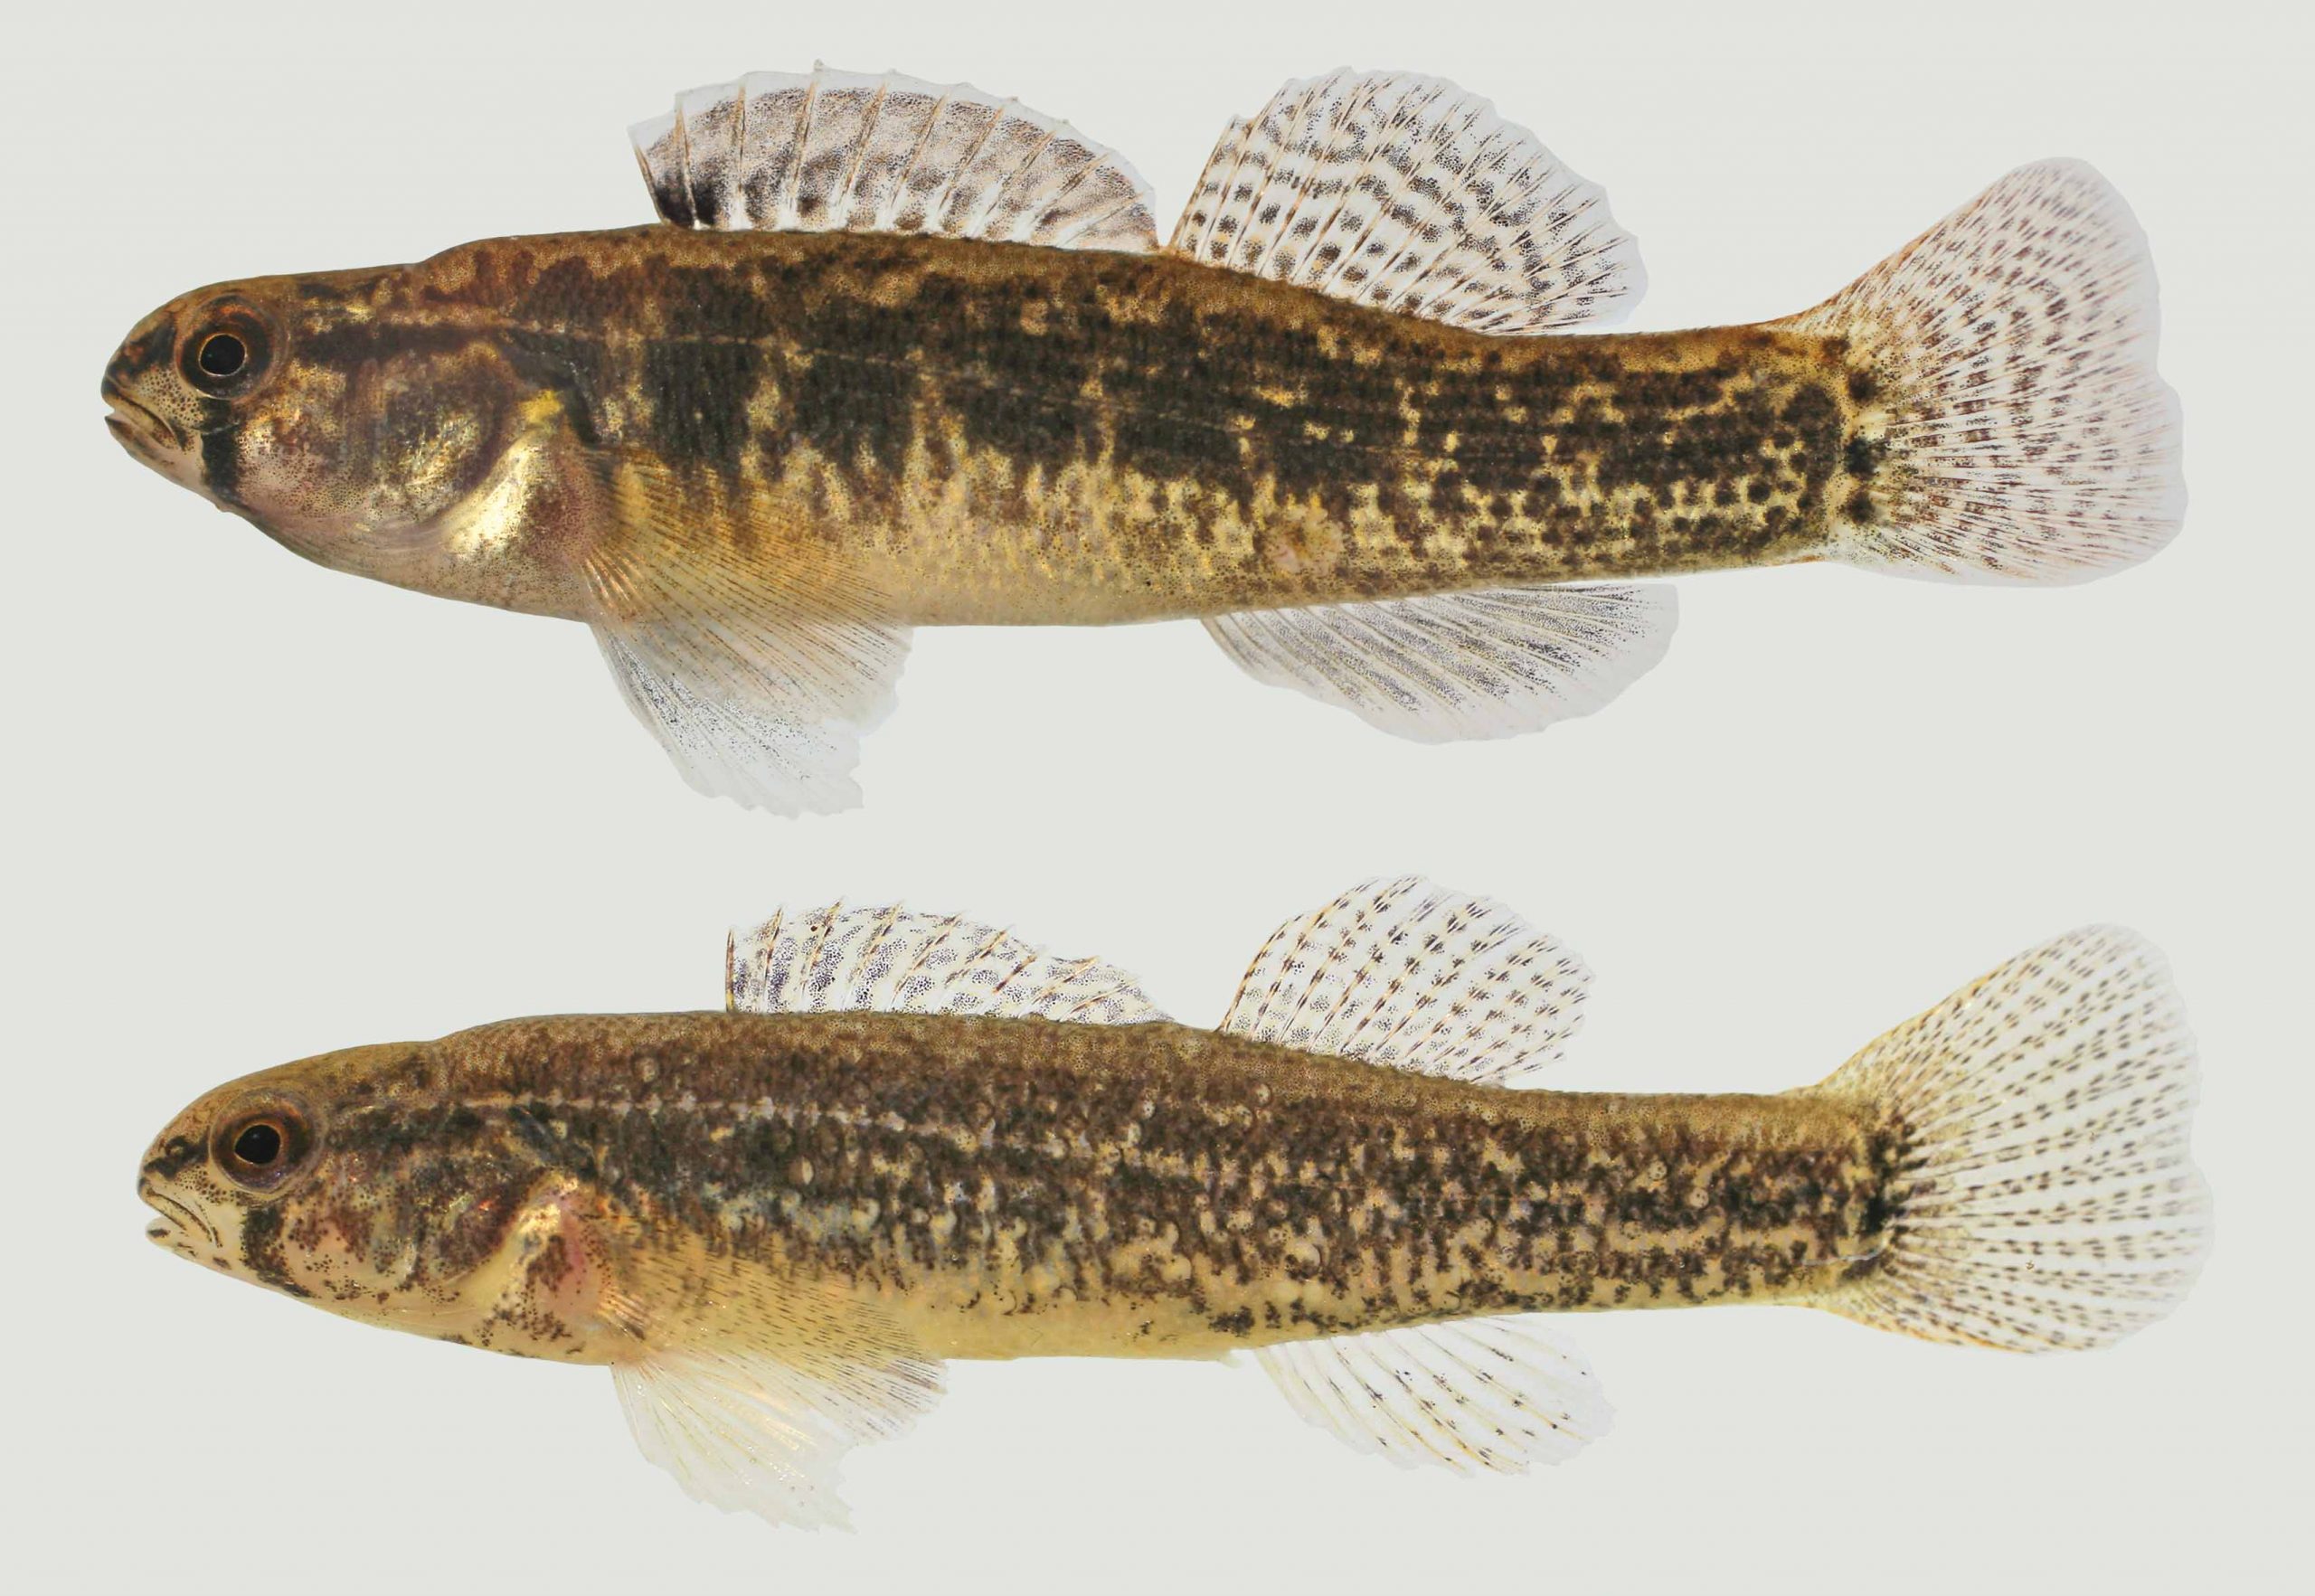 Lateral view of goldstripe darters